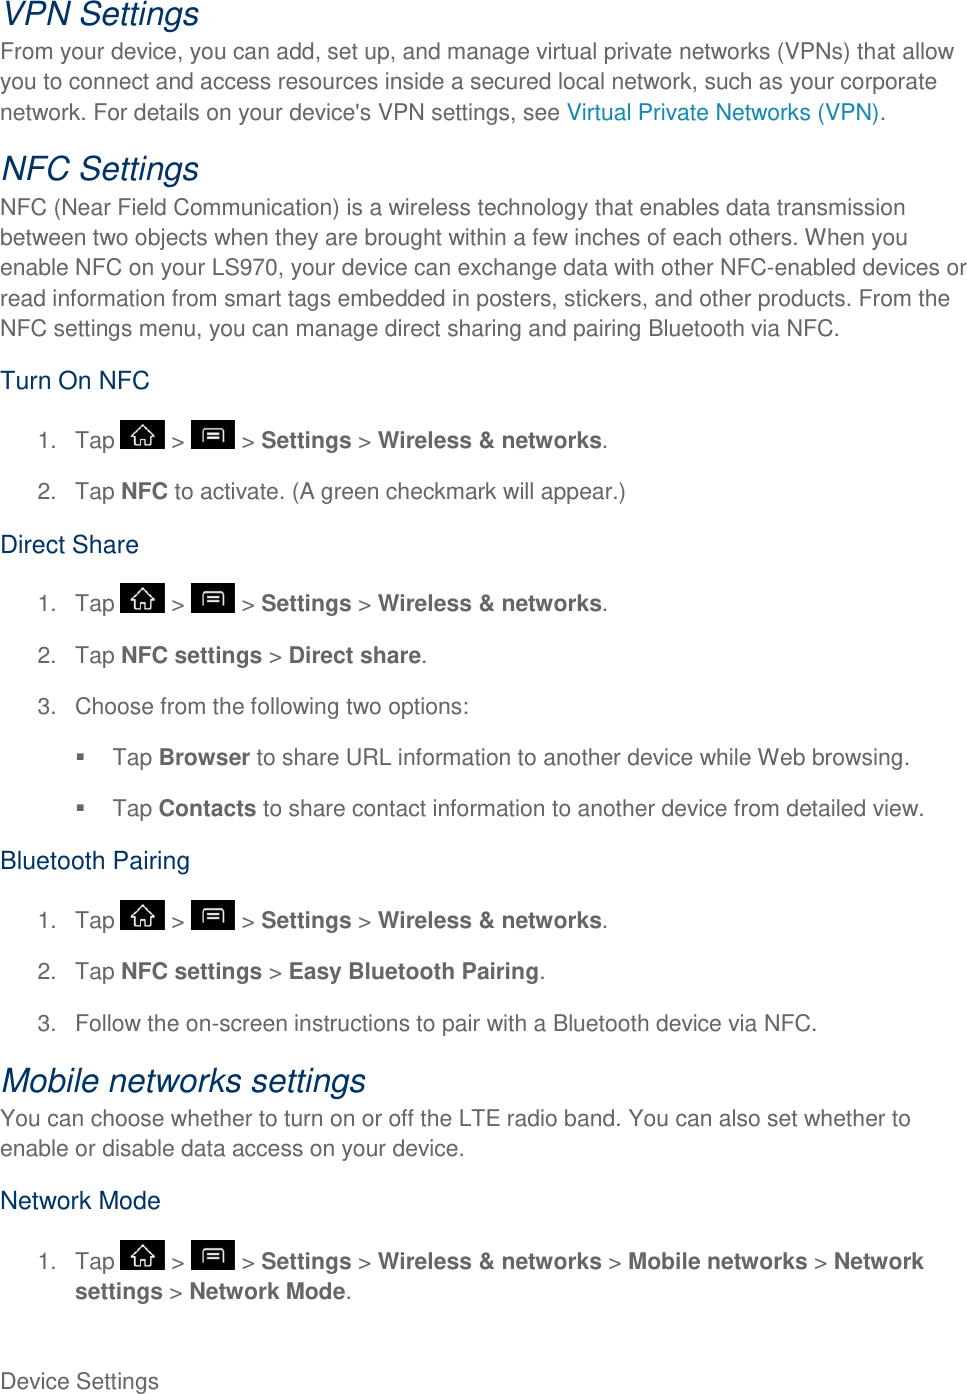 Device Settings     VPN Settings From your device, you can add, set up, and manage virtual private networks (VPNs) that allow you to connect and access resources inside a secured local network, such as your corporate network. For details on your device&apos;s VPN settings, see Virtual Private Networks (VPN). NFC Settings NFC (Near Field Communication) is a wireless technology that enables data transmission between two objects when they are brought within a few inches of each others. When you enable NFC on your LS970, your device can exchange data with other NFC-enabled devices or read information from smart tags embedded in posters, stickers, and other products. From the NFC settings menu, you can manage direct sharing and pairing Bluetooth via NFC. Turn On NFC 1.  Tap   &gt;   &gt; Settings &gt; Wireless &amp; networks. 2.  Tap NFC to activate. (A green checkmark will appear.) Direct Share 1.  Tap   &gt;   &gt; Settings &gt; Wireless &amp; networks. 2.  Tap NFC settings &gt; Direct share. 3.  Choose from the following two options:   Tap Browser to share URL information to another device while Web browsing.  Tap Contacts to share contact information to another device from detailed view. Bluetooth Pairing 1.  Tap   &gt;   &gt; Settings &gt; Wireless &amp; networks. 2.  Tap NFC settings &gt; Easy Bluetooth Pairing. 3.  Follow the on-screen instructions to pair with a Bluetooth device via NFC. Mobile networks settings You can choose whether to turn on or off the LTE radio band. You can also set whether to enable or disable data access on your device. Network Mode 1.  Tap   &gt;   &gt; Settings &gt; Wireless &amp; networks &gt; Mobile networks &gt; Network settings &gt; Network Mode.  